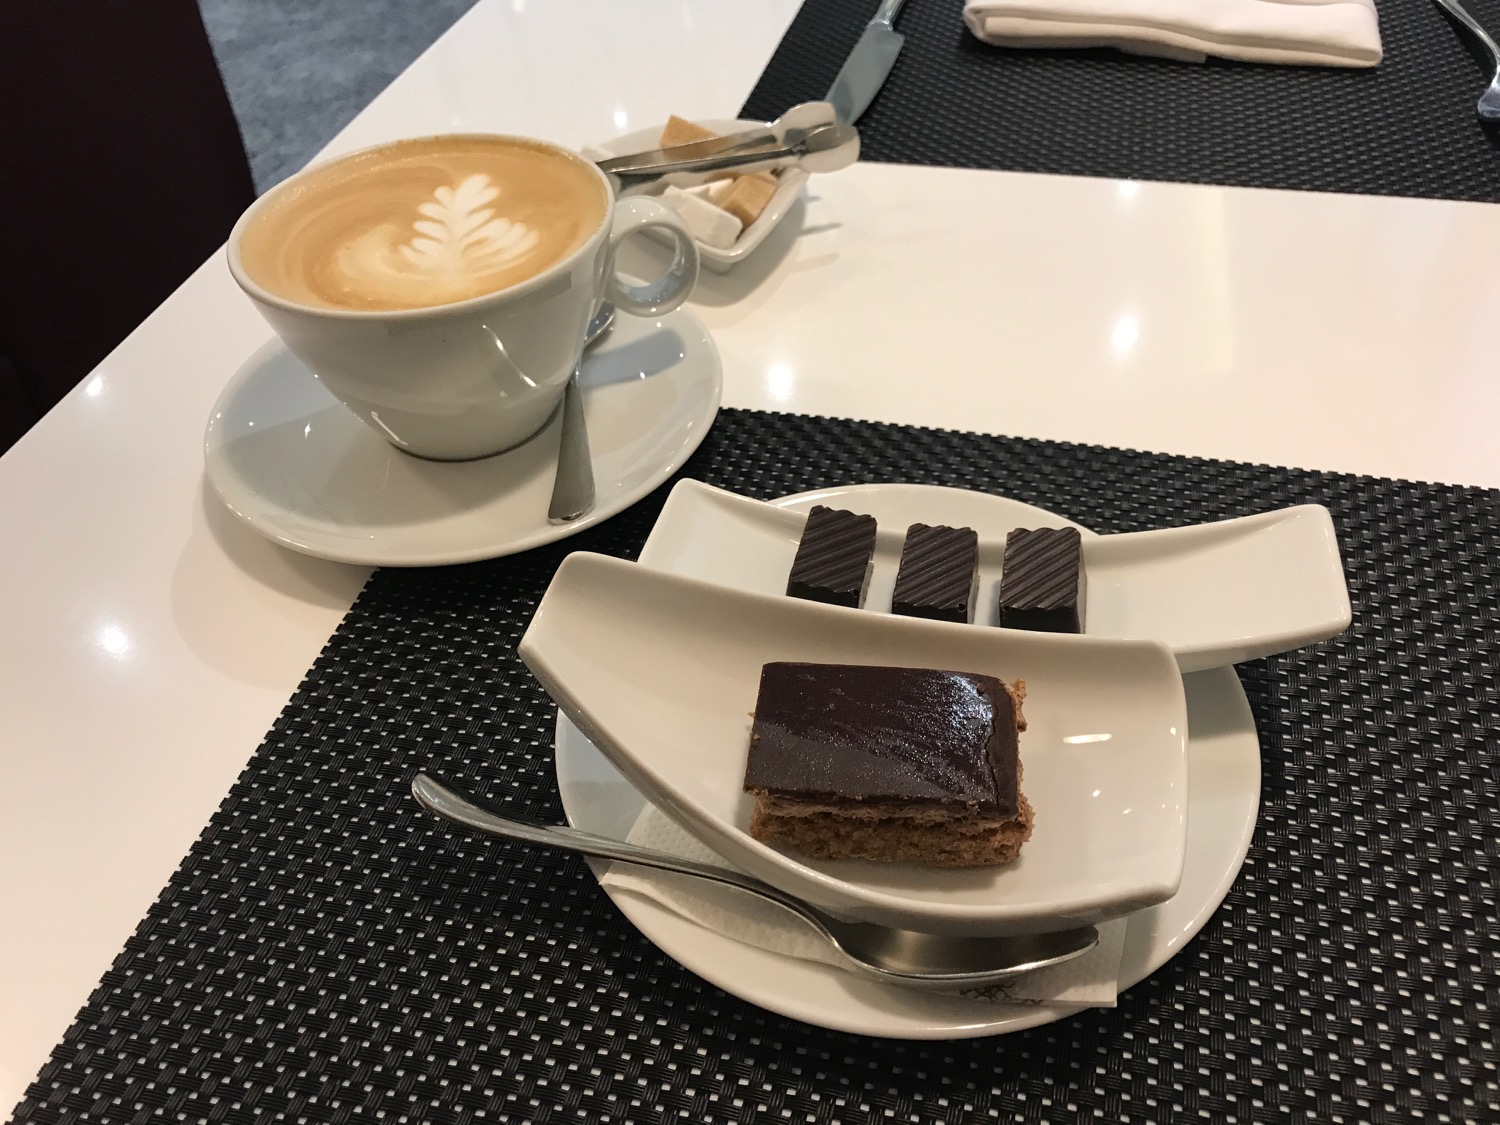 a plate of chocolate cake and a cup of coffee